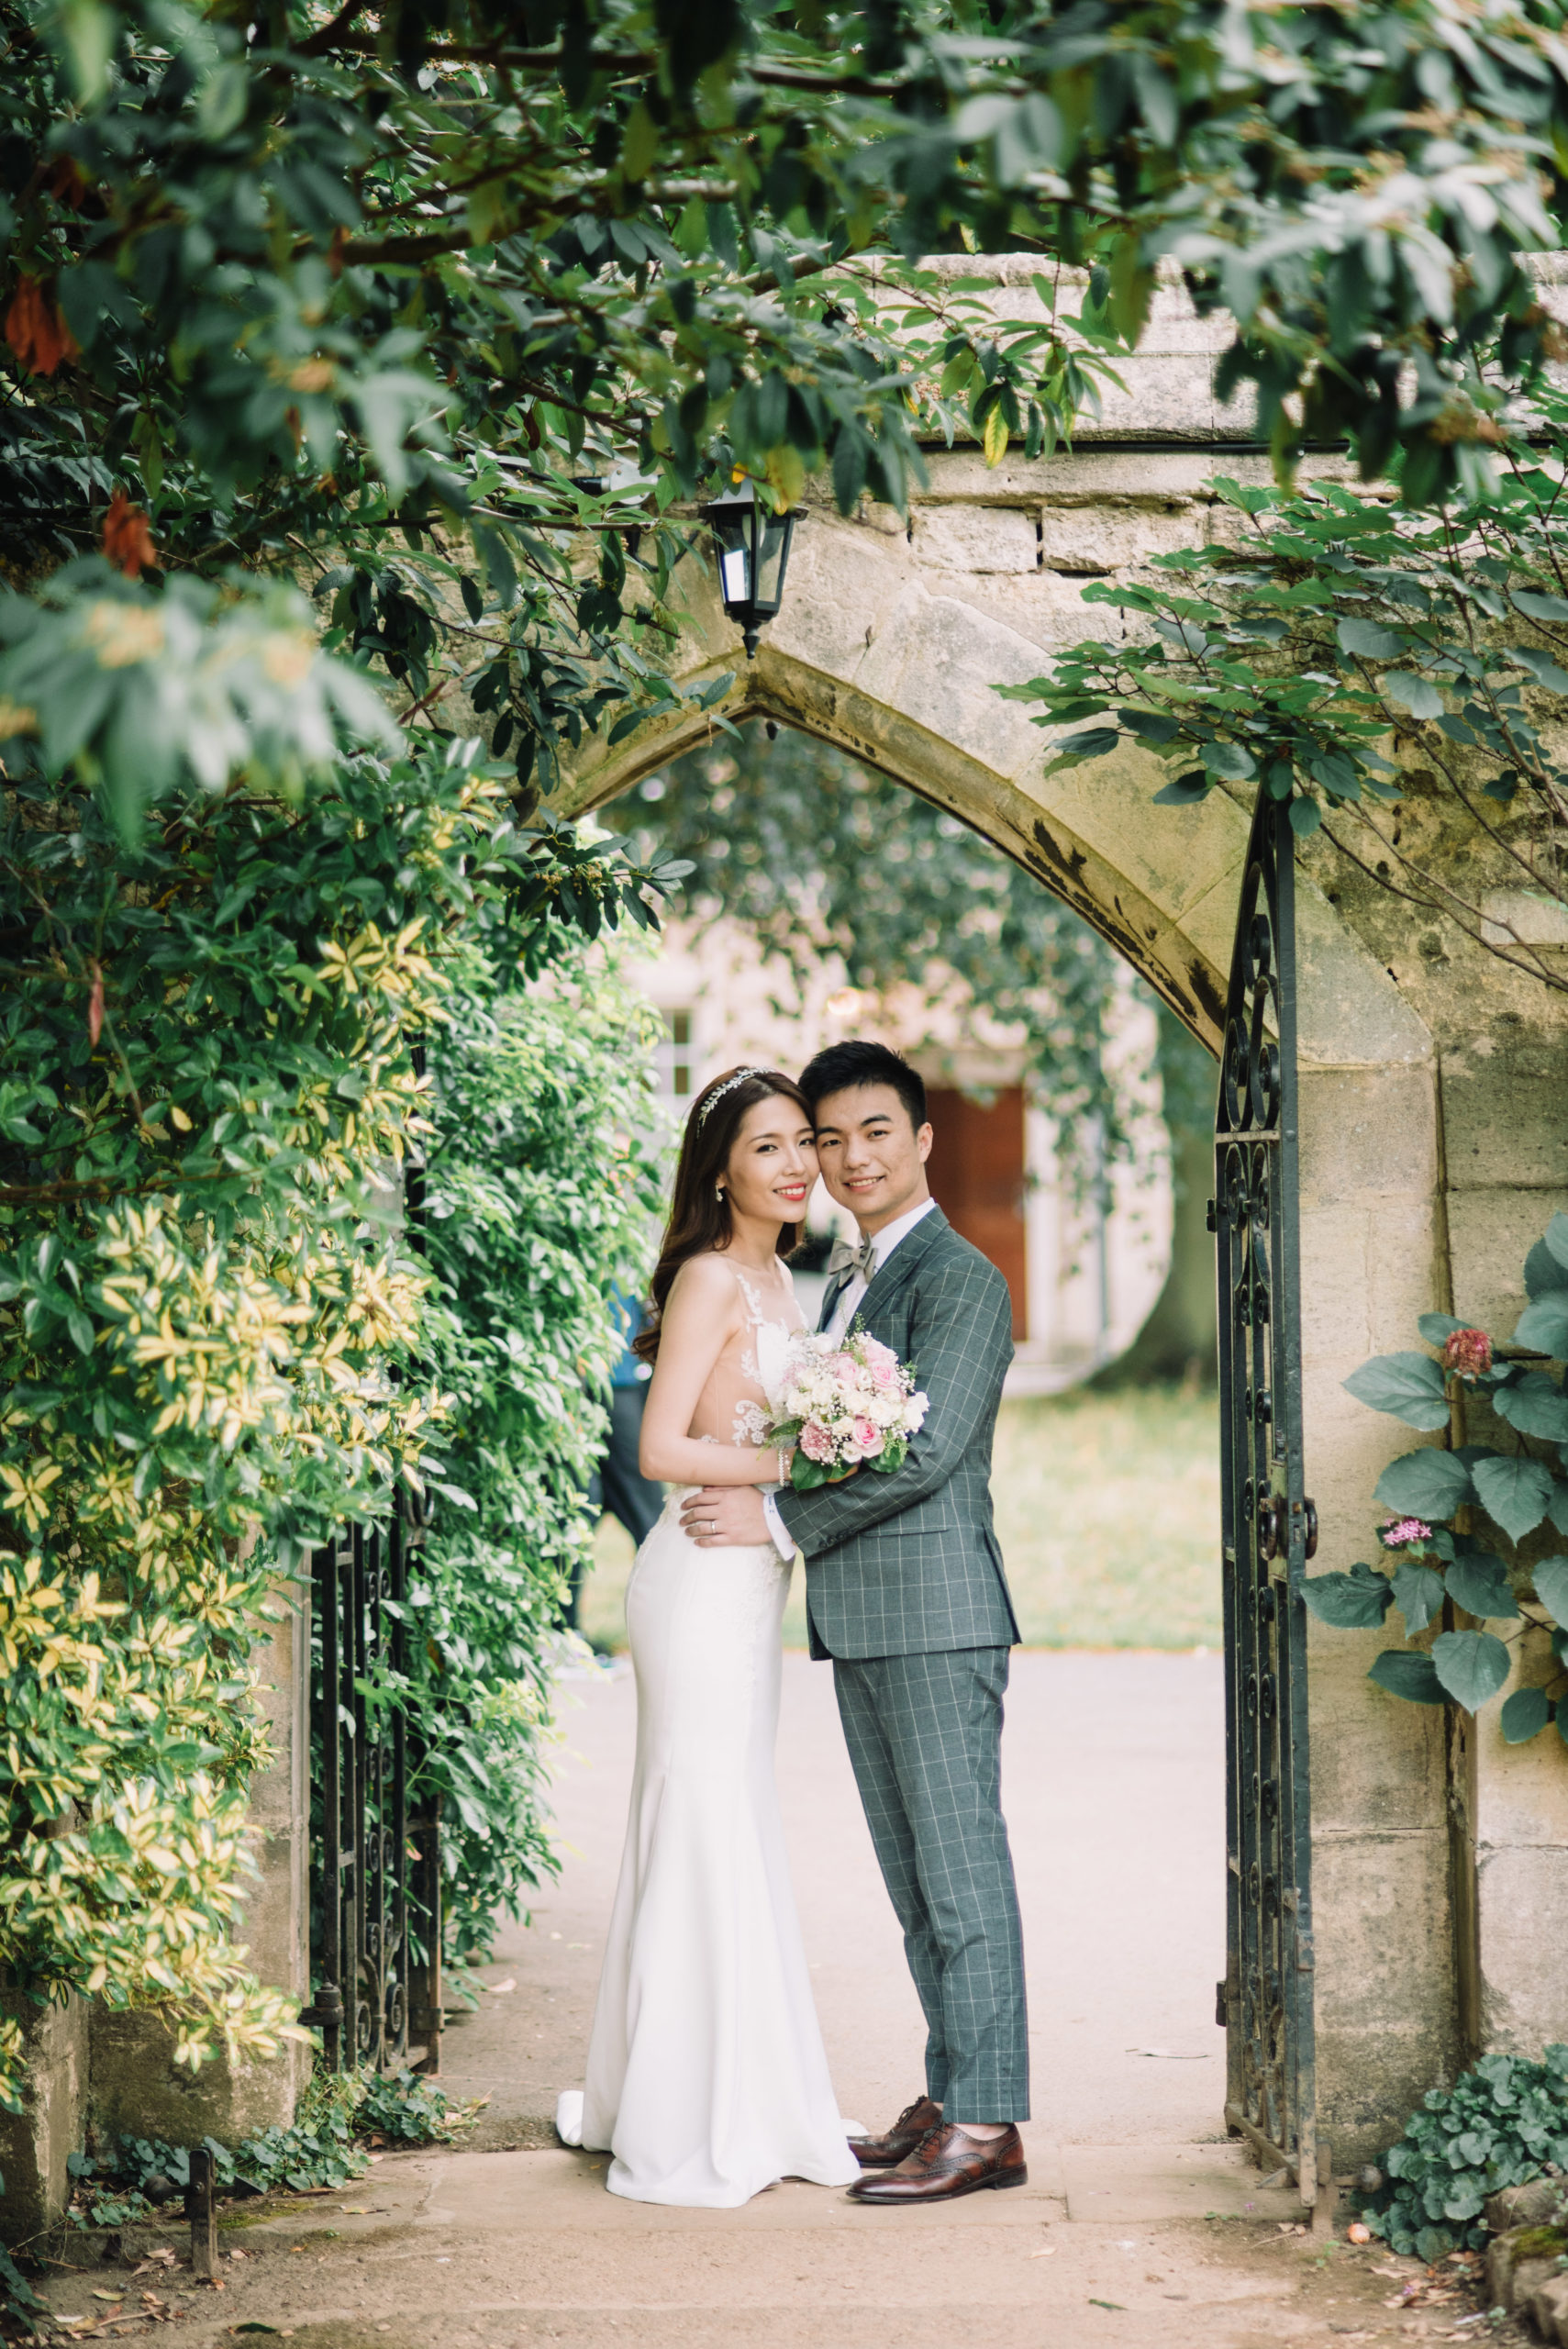 Bride and groom on their wedding day in Oxford with wedding photographer